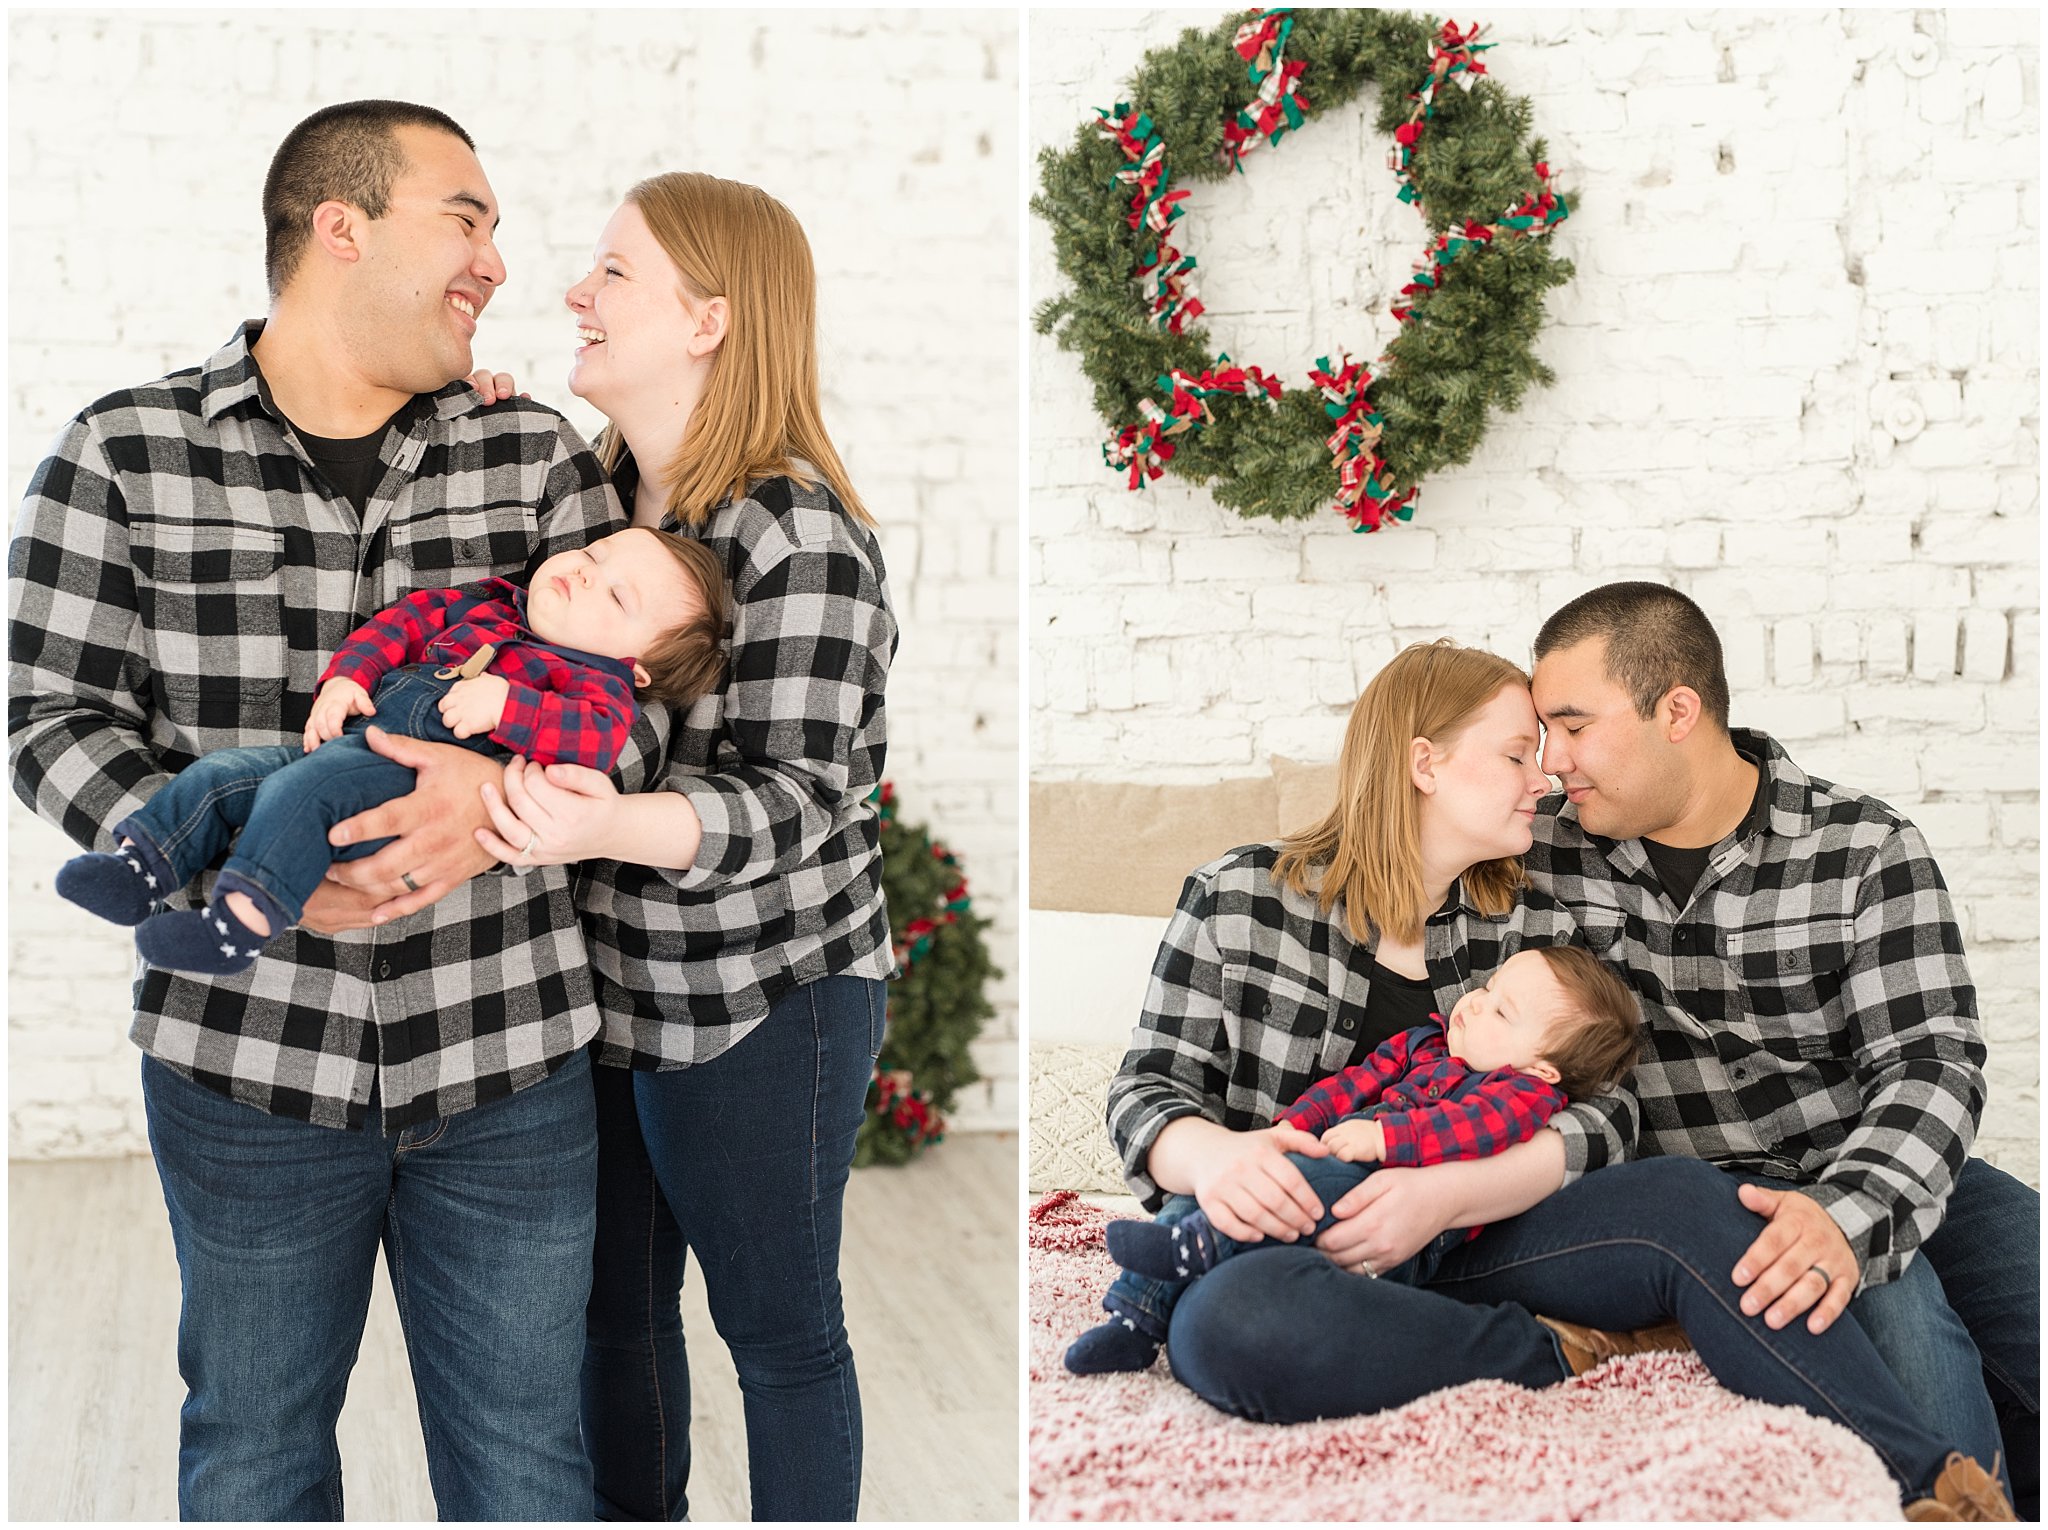 Parents laugh and snuggle sleeping baby boy | Family Christmas session at the 5th floor | Utah Photographers | Jessie and Dallin Photography